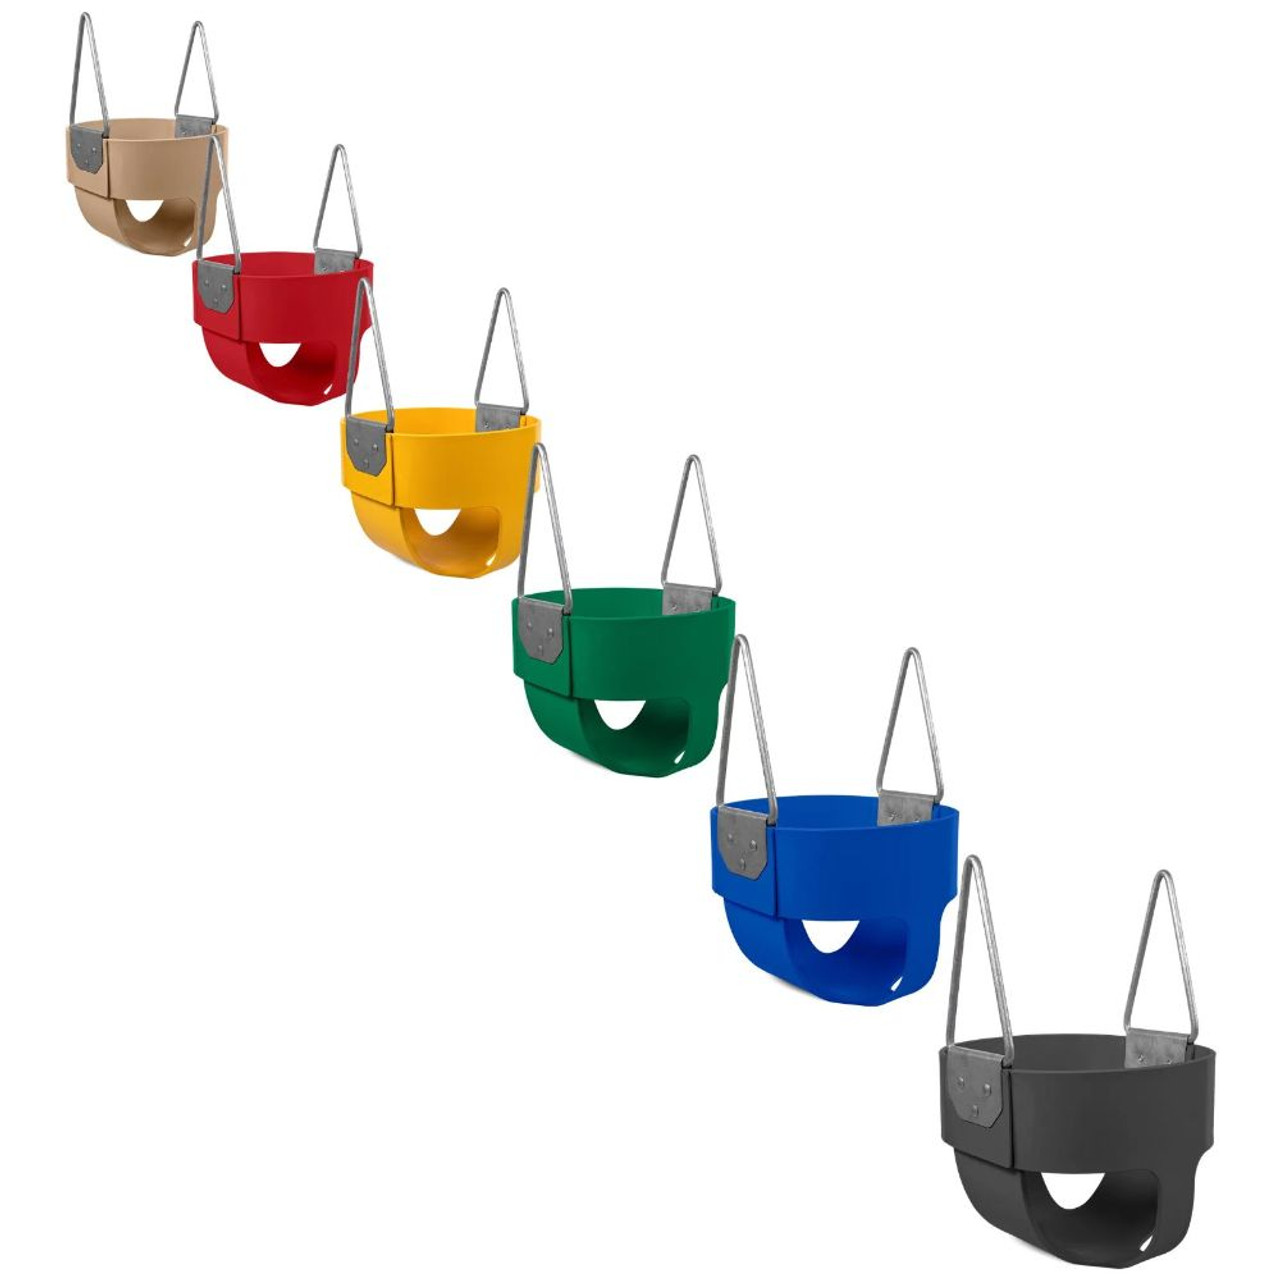 Toddler Full Bucket Rubber Seat - colors